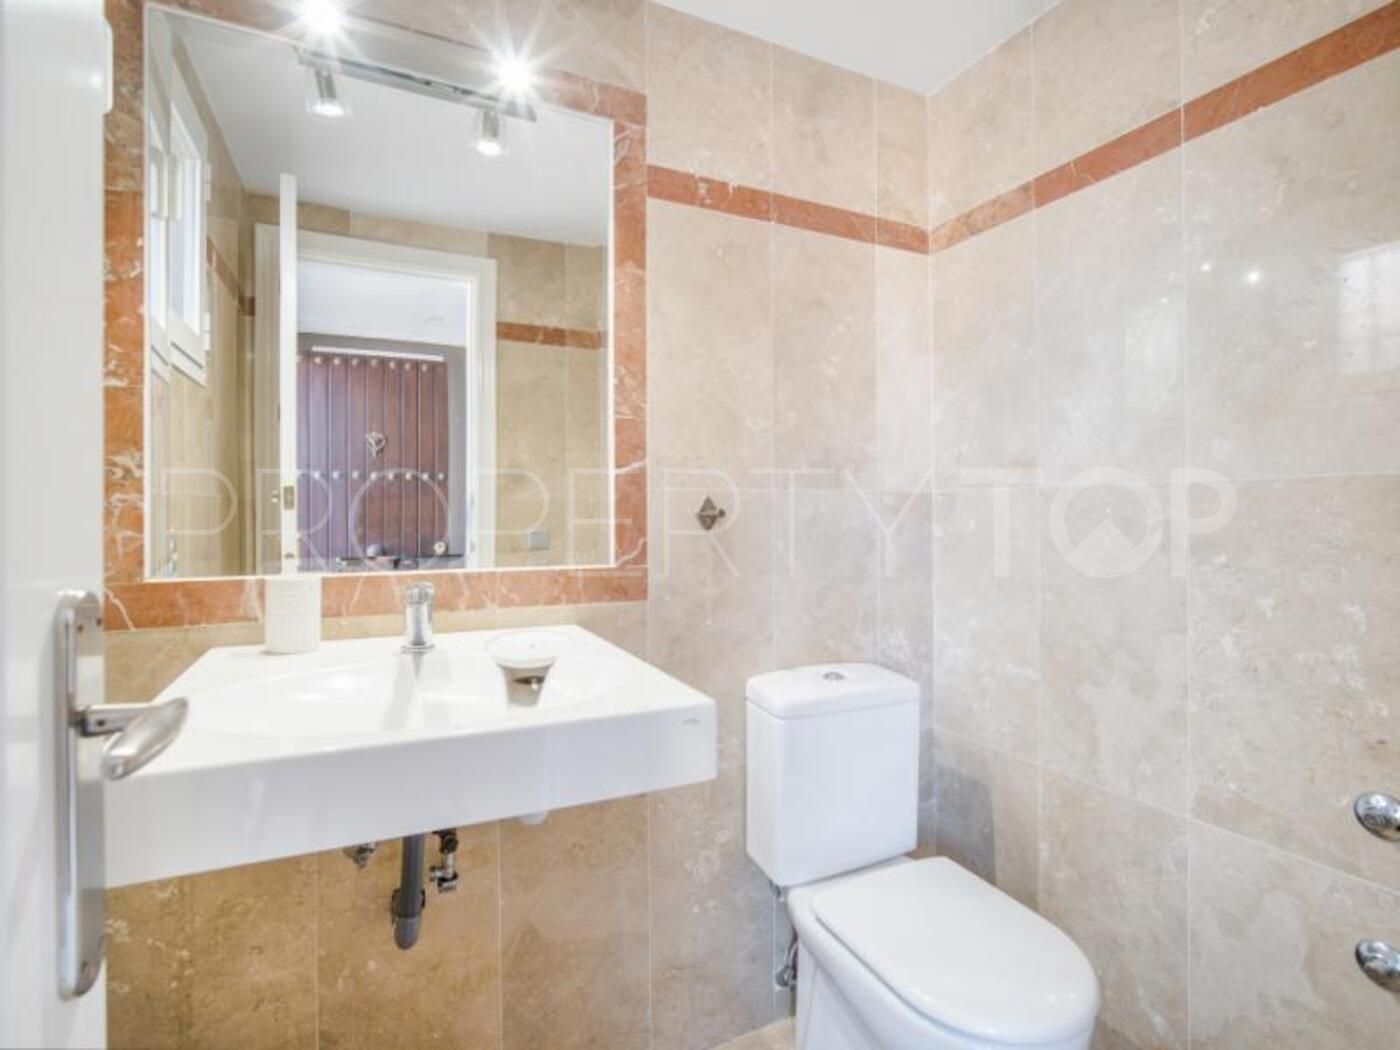 Town house in Condes de Iza for sale